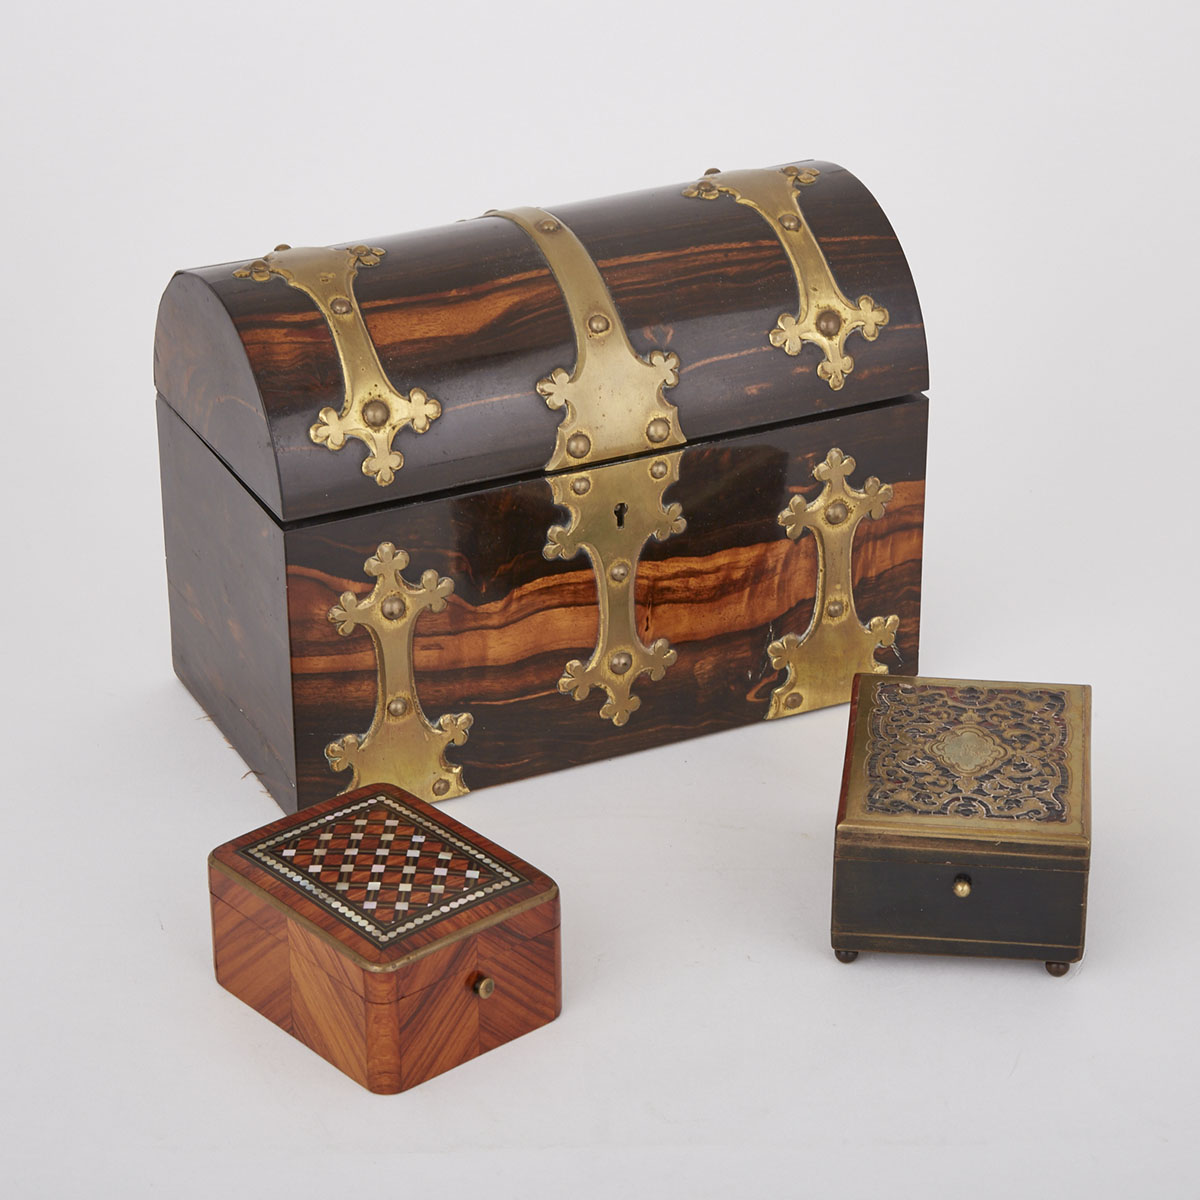 Three Boxes: A Victorian Gilt Brass Mounted Coromandel Domed Stationary Box, Howell James & Co., London, c.1860, together with a Boulle work box and a Mother of Pearl and ebony inlaid Kingwood Dresser Box